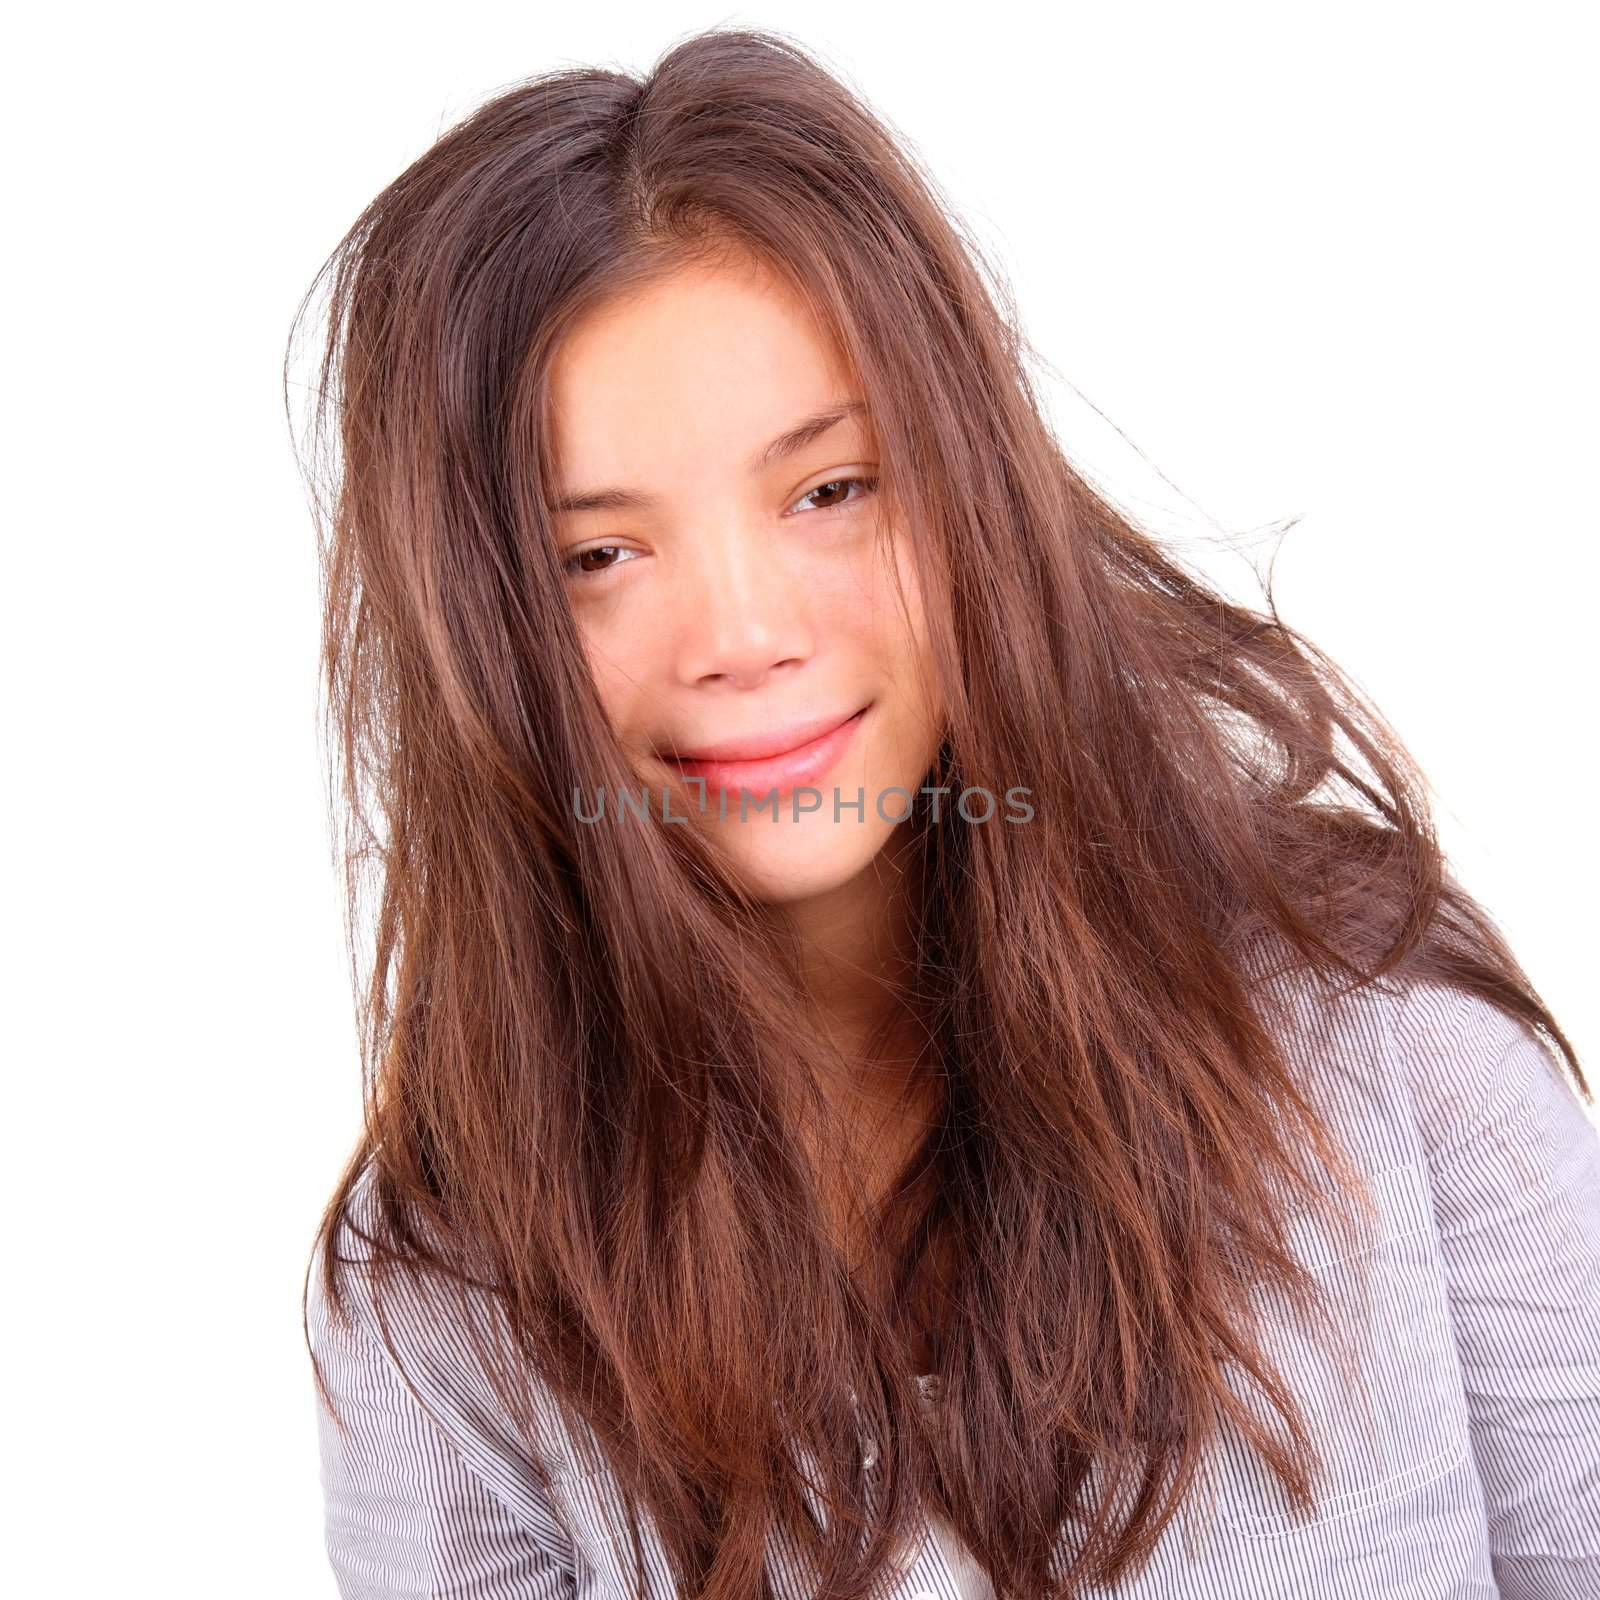 Tired woman portrait. Tired woman with very messy long morning hair and a silly smile - just out of bed. Beautiful mixed chinese / caucasian model isolated on white background.